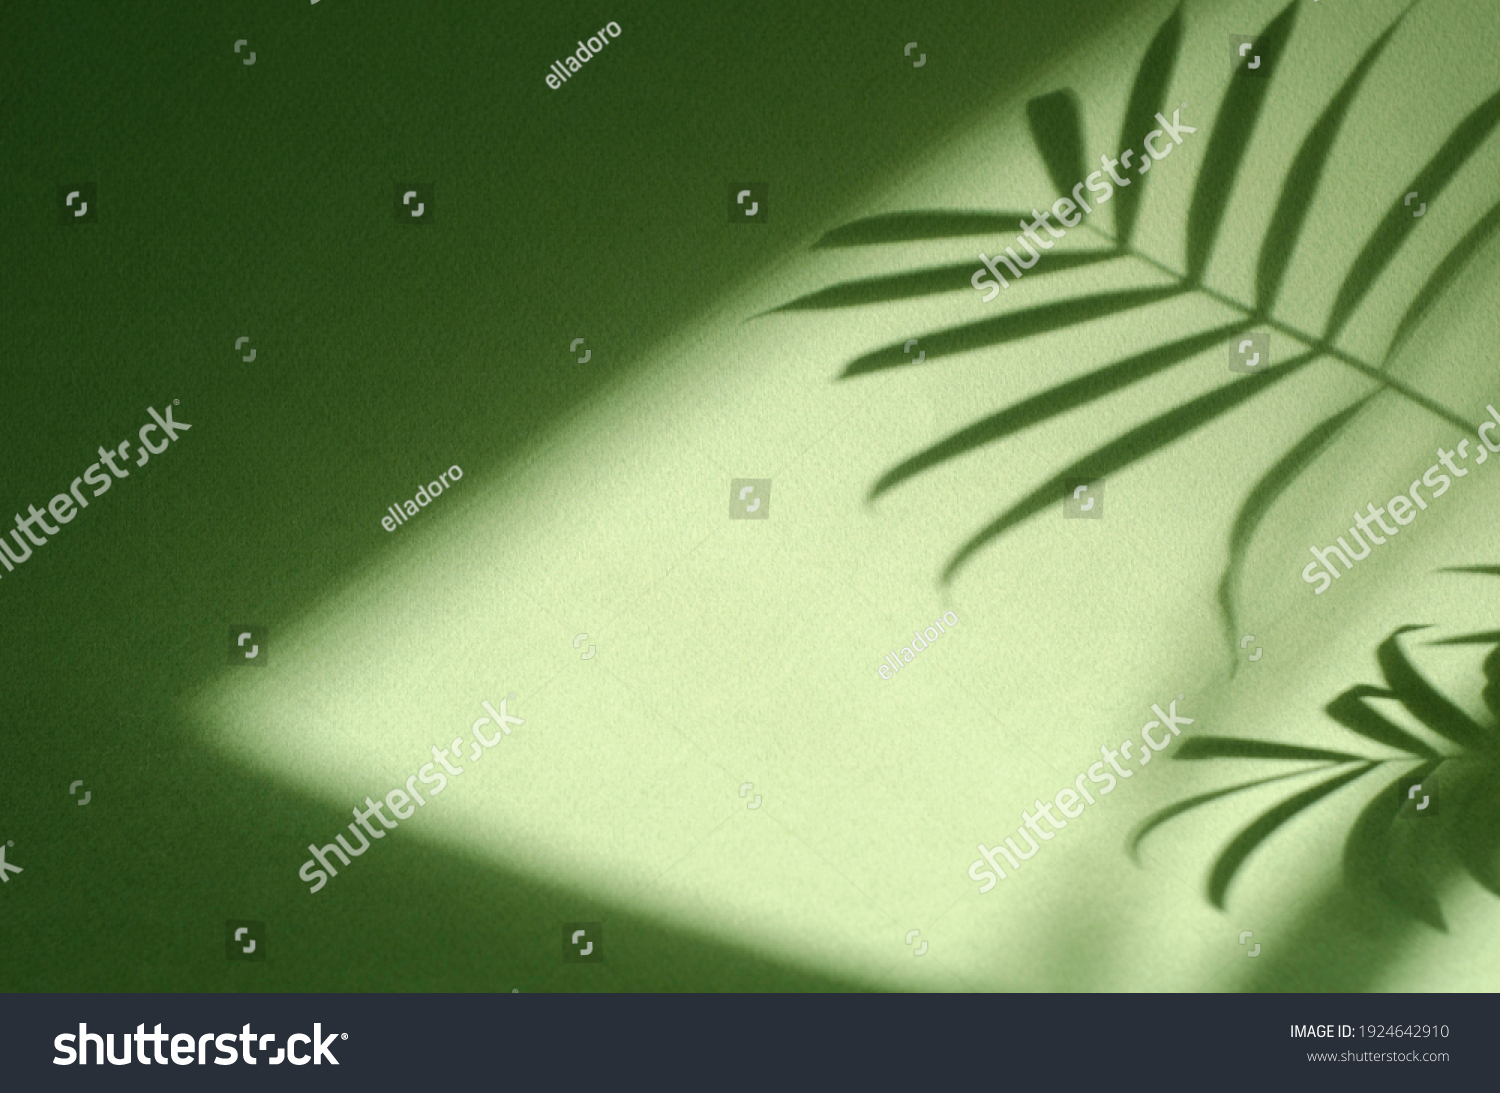 Green background with shadow of palm leaves. Ecology, nature, purity and authenticity concept. Texture template for design, mock up, wallpaper, poster, banner, announcement, invitation, greeting card. #1924642910